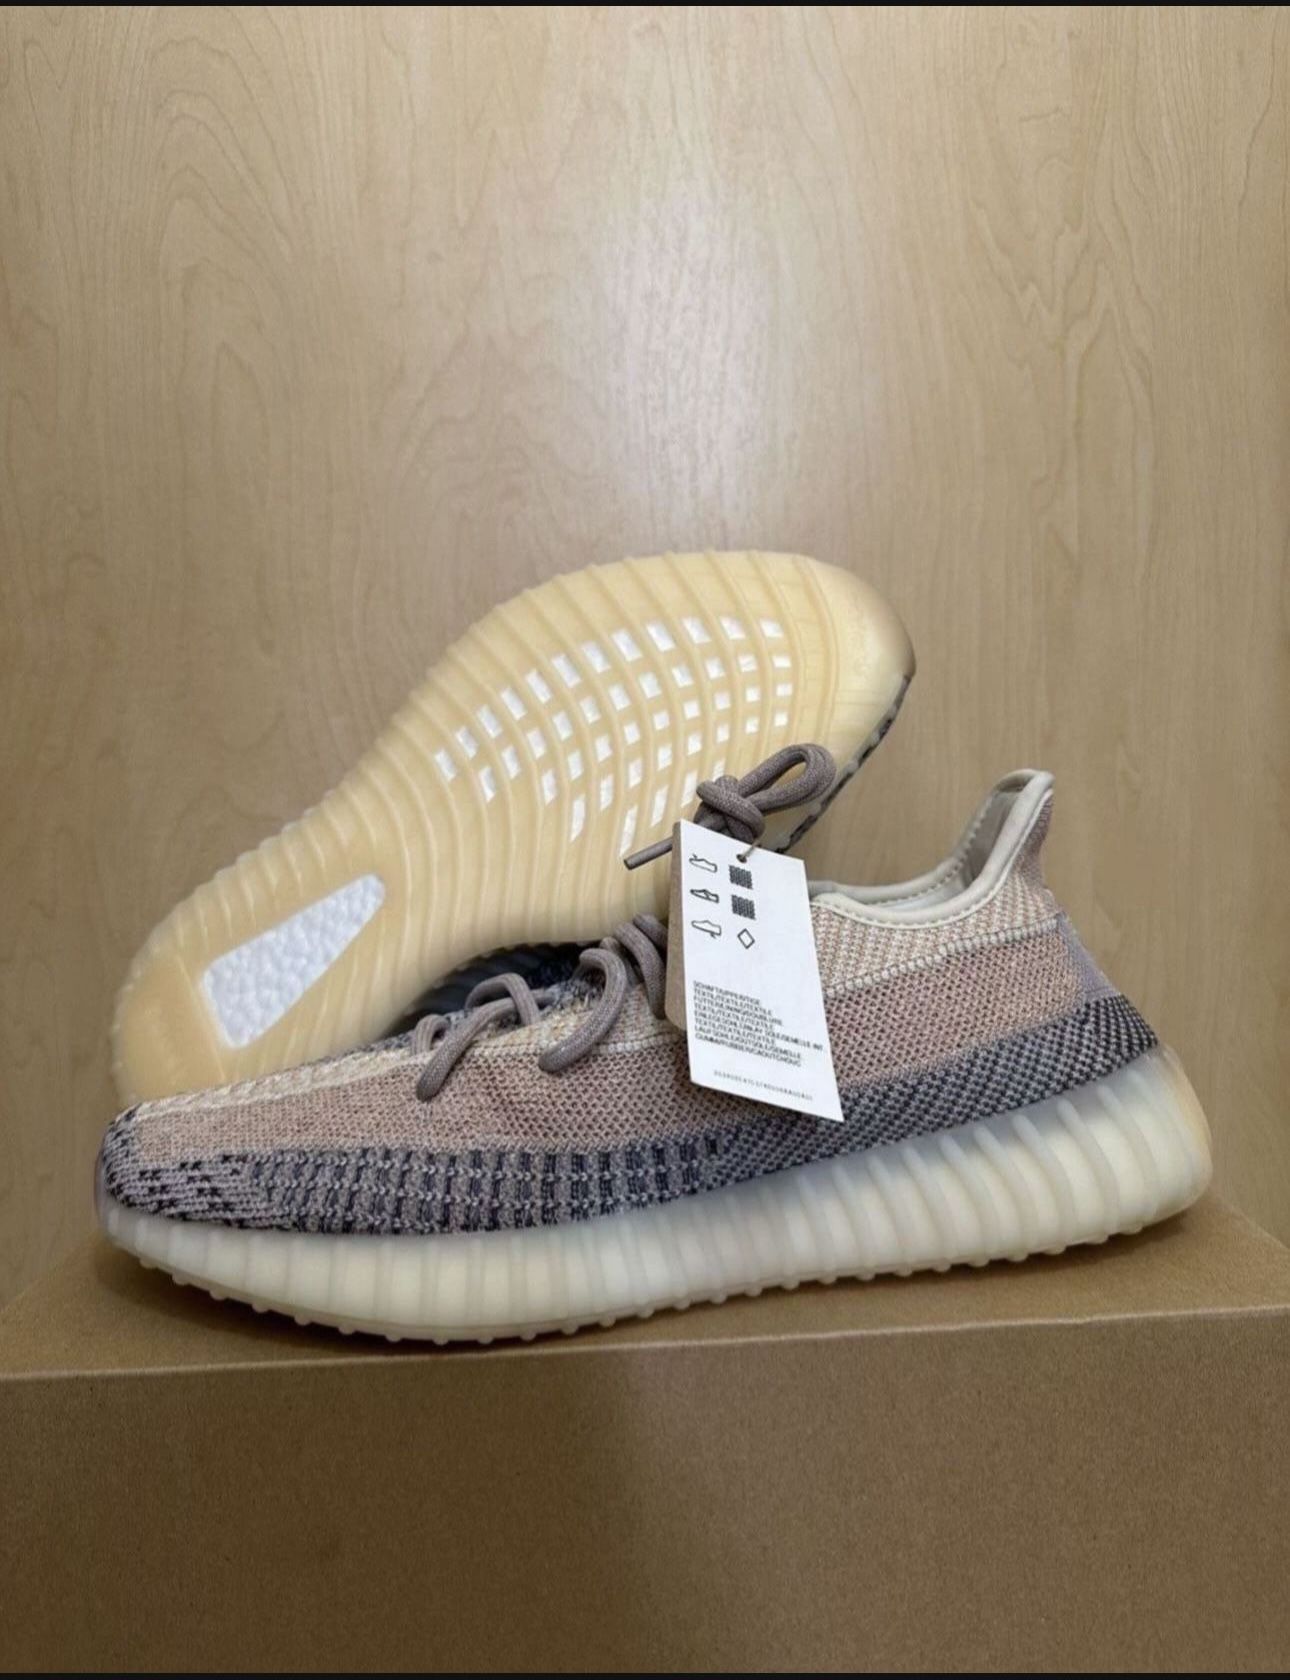 Adidas Yeezy 350 Boost V2 Ash Pearl Size 11 GY7658 Brand New